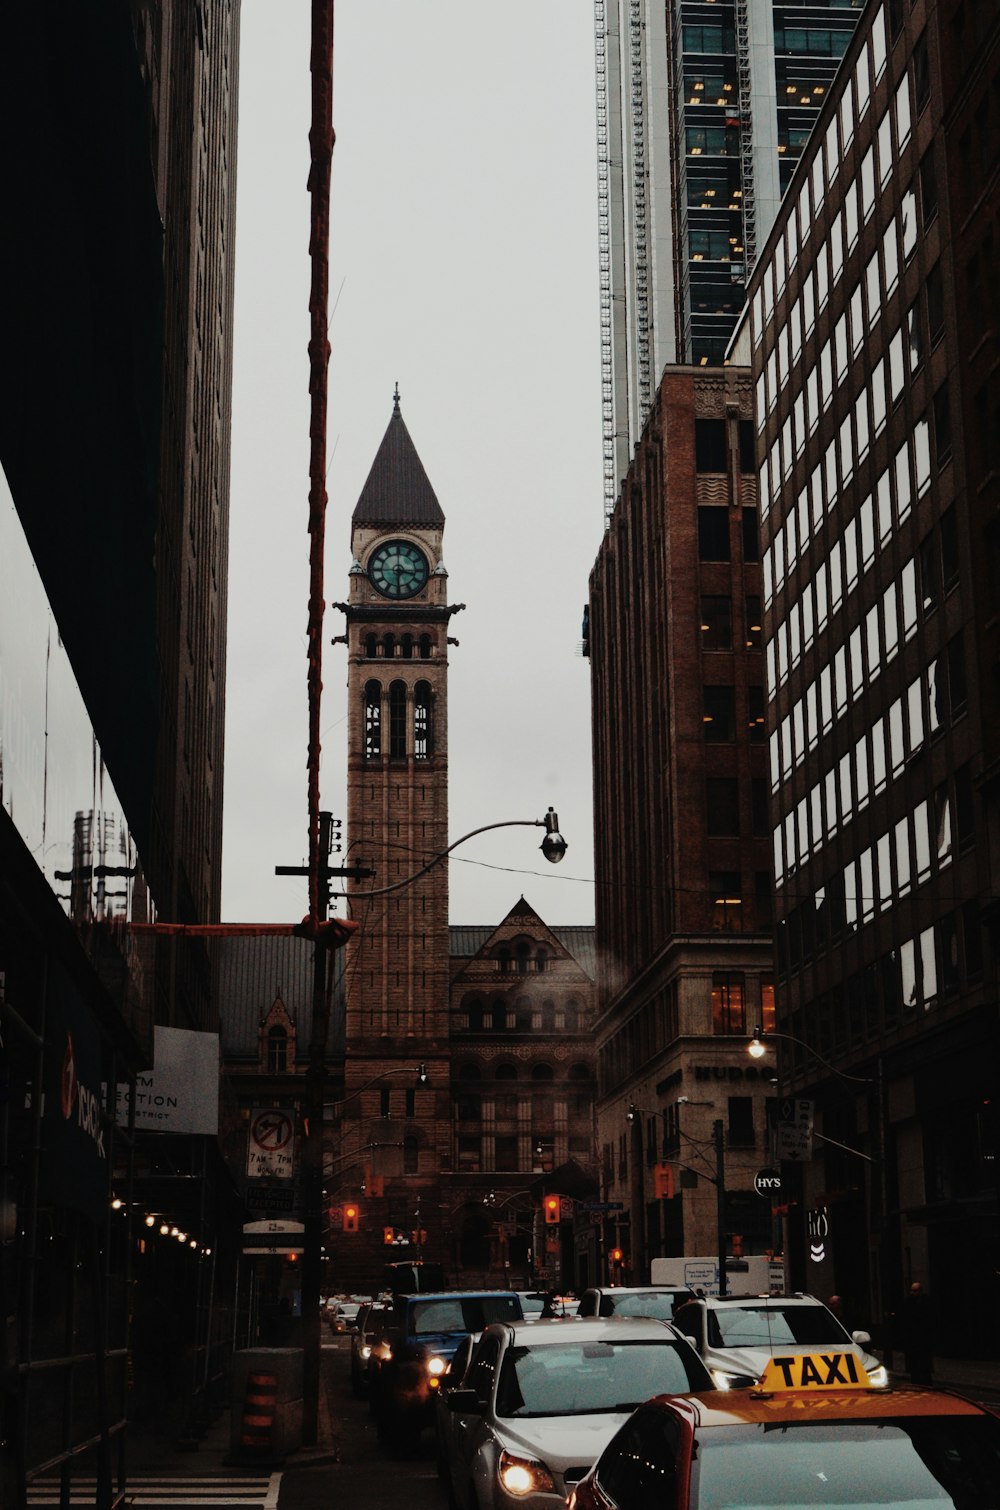 City Aesthetic Pictures Download Free Images On Unsplash